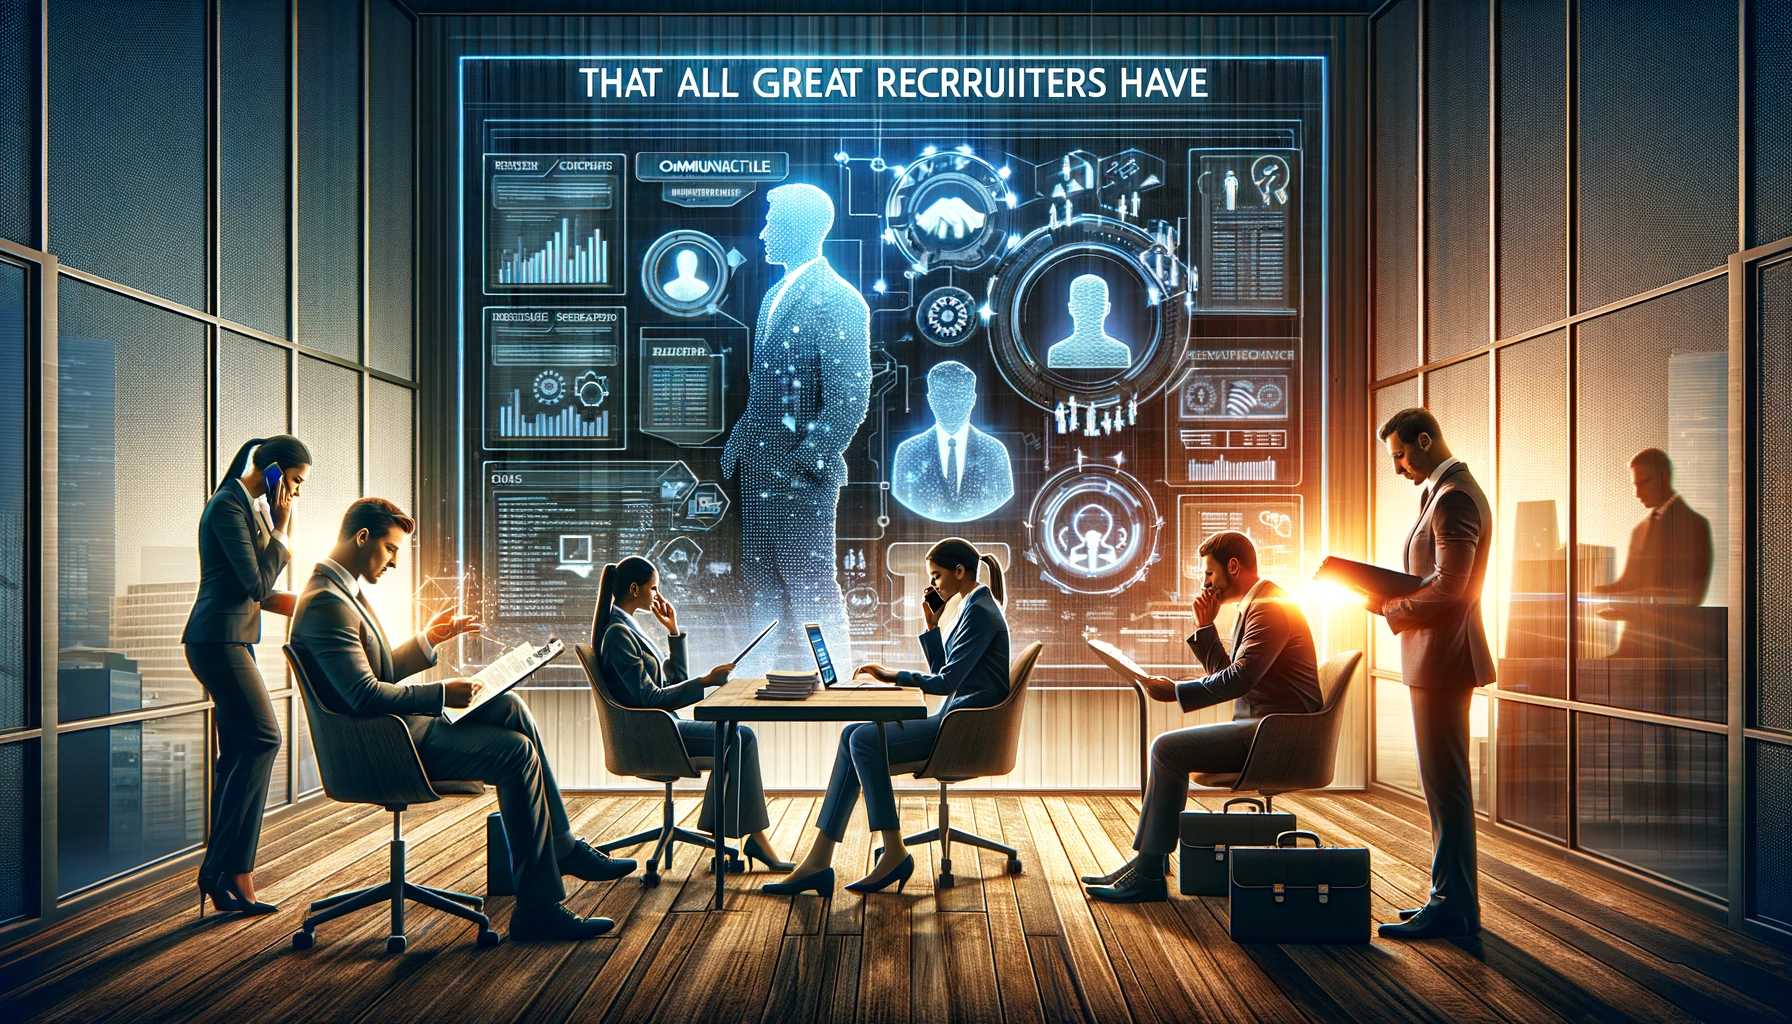 Recruitment Skills That All Great Recruiters Have